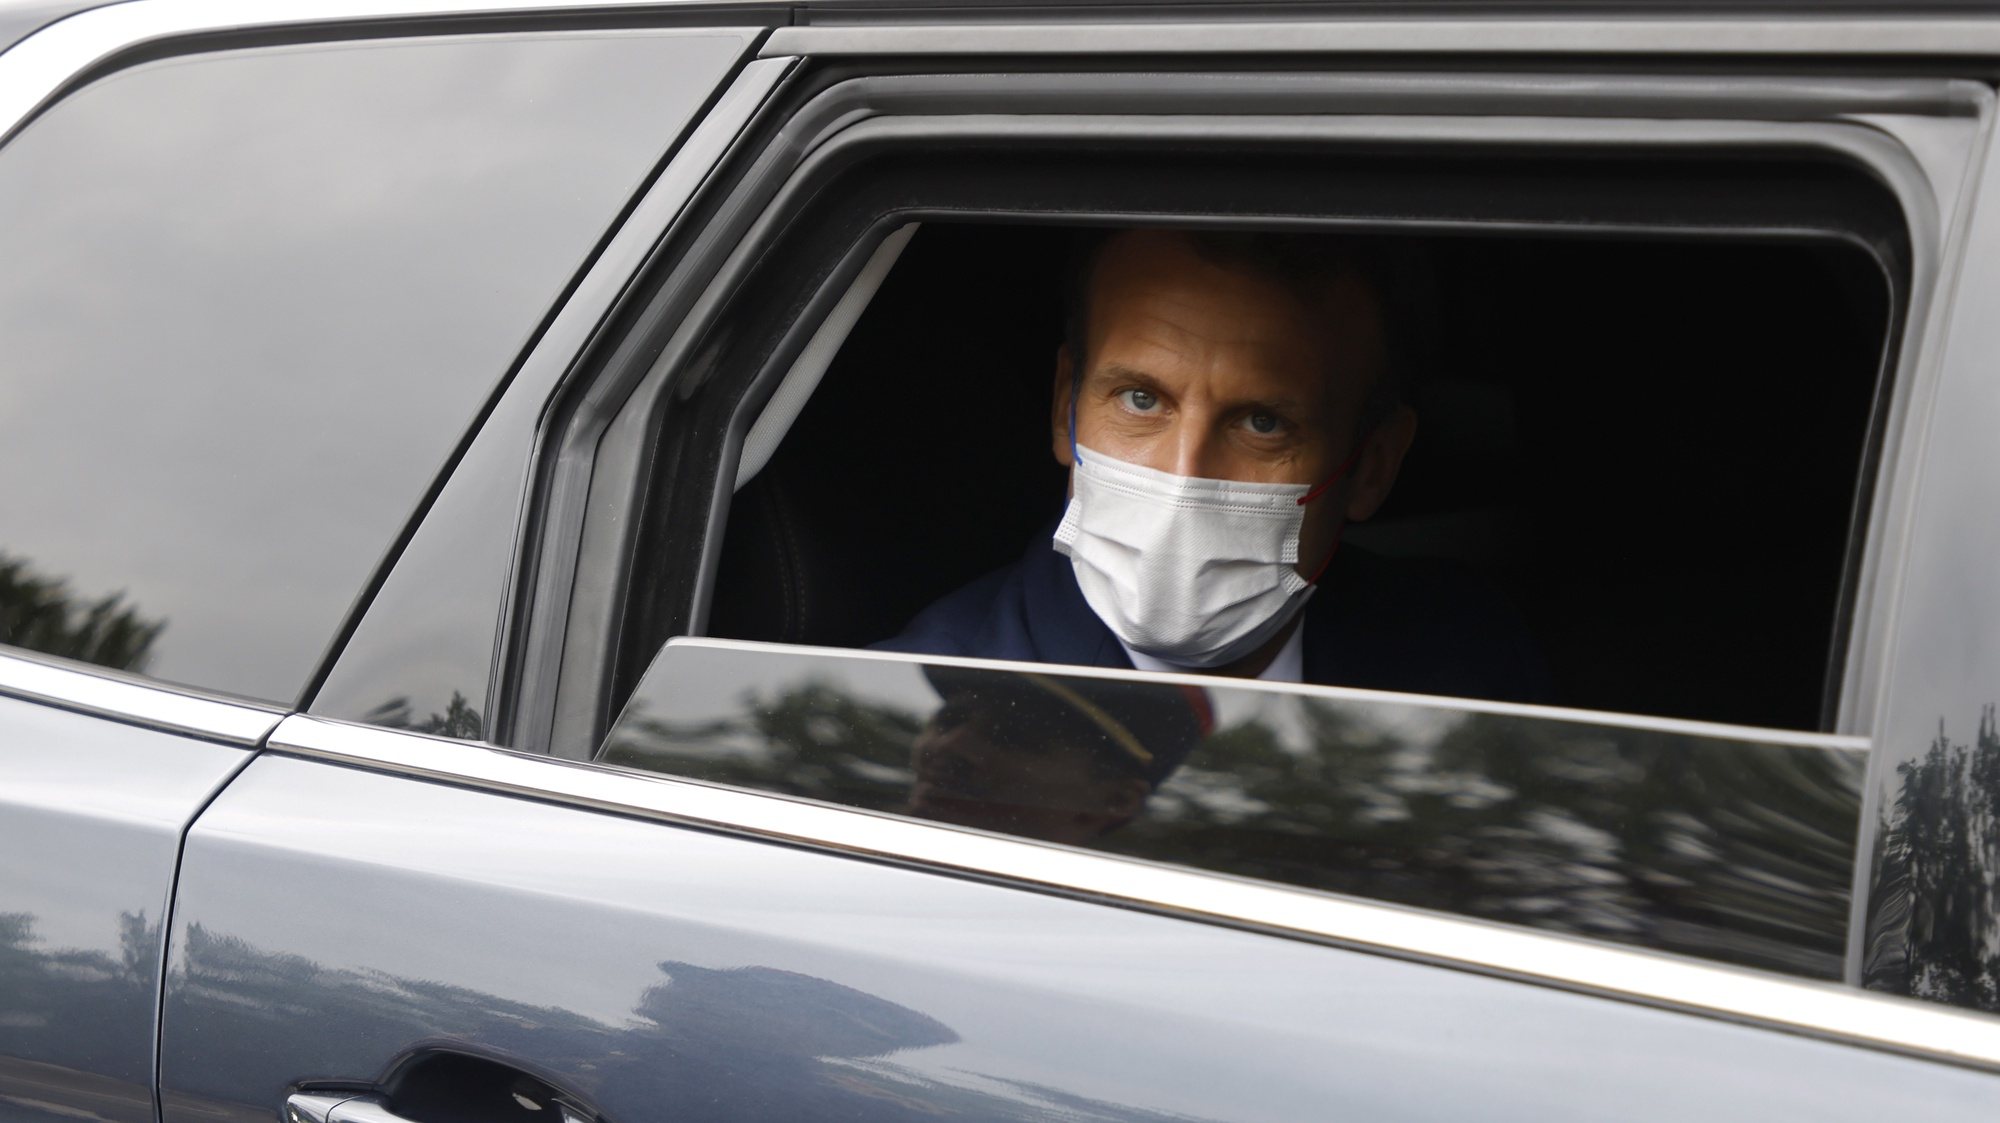 epa09344017 French President Emmanuel Macron leaves by car at the end of the annual Bastille Day military parade on the Champs-Elysees avenue in Paris, France, 14 July 2021.  EPA/LUDOVIC MARIN / POOL  MAXPPP OUT